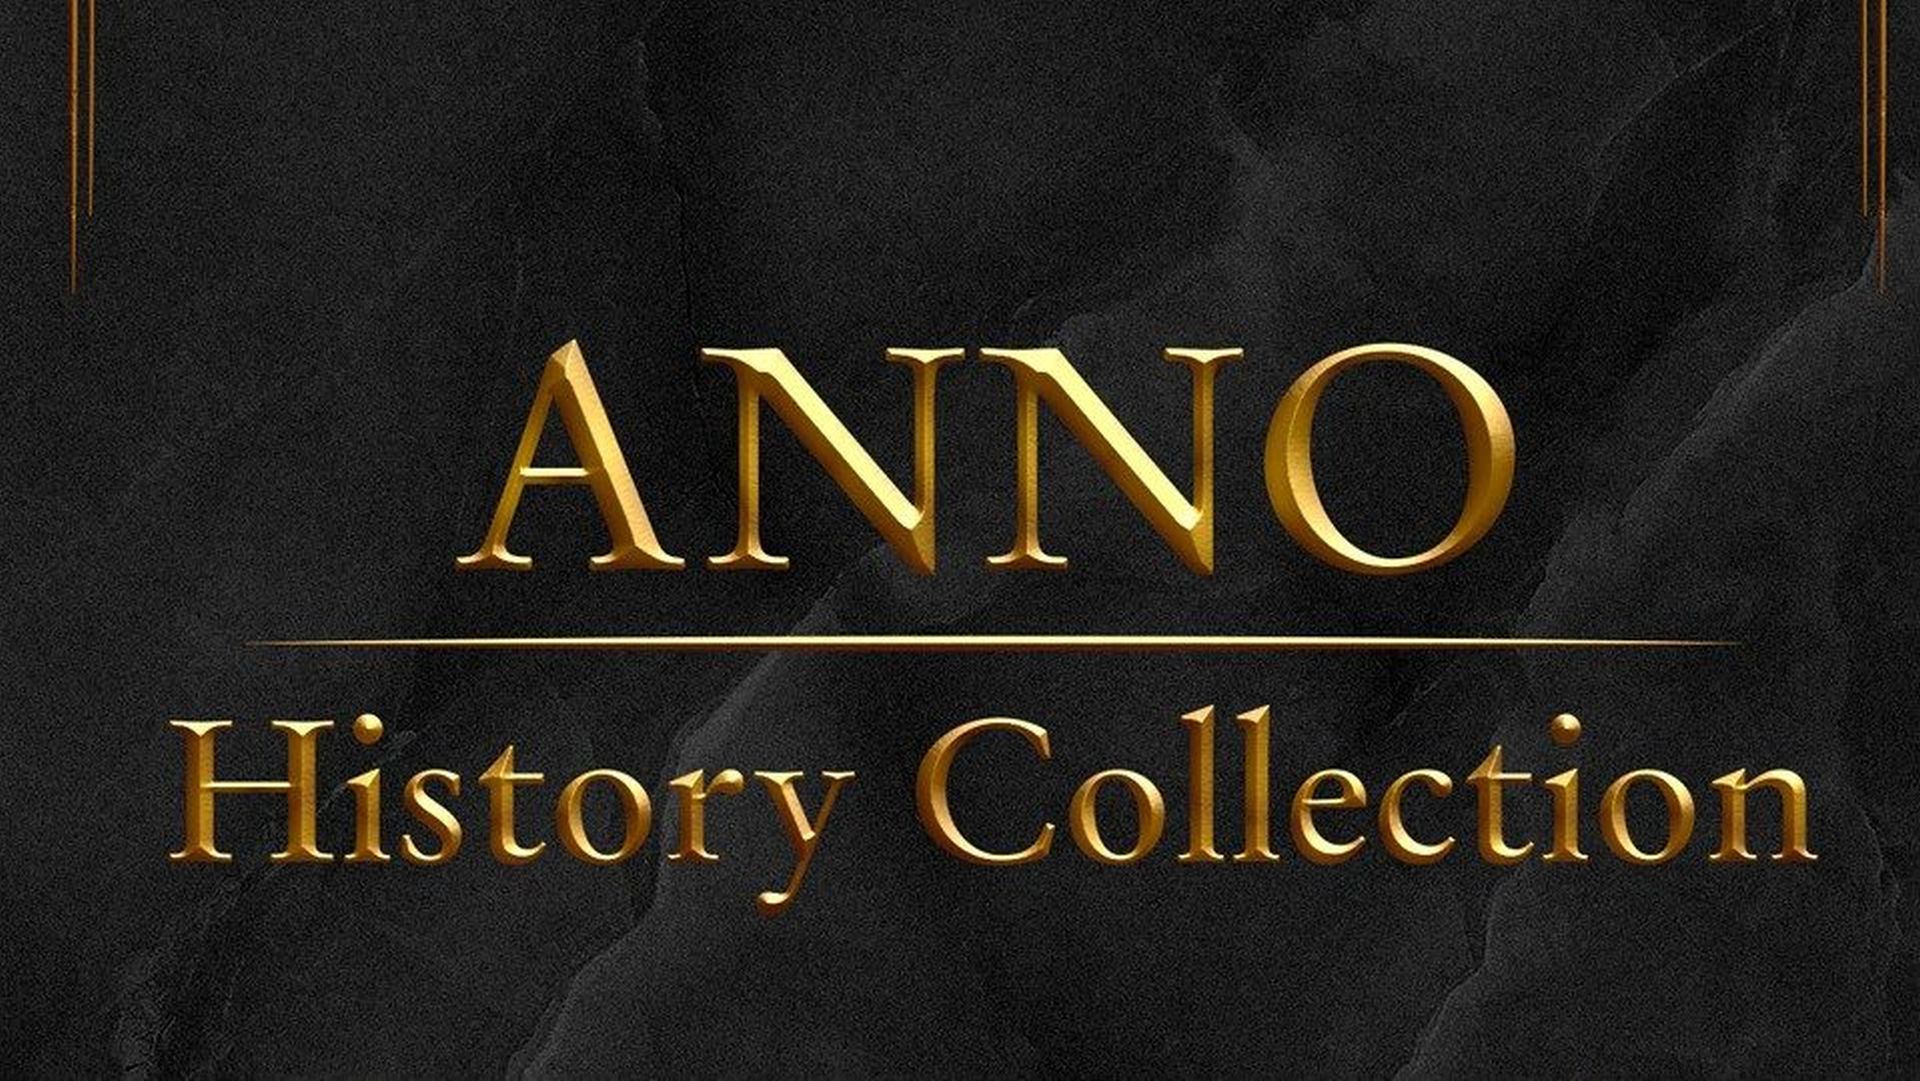 Anno History Collection Announced, 4 Classic With Support Titles Contains 4K